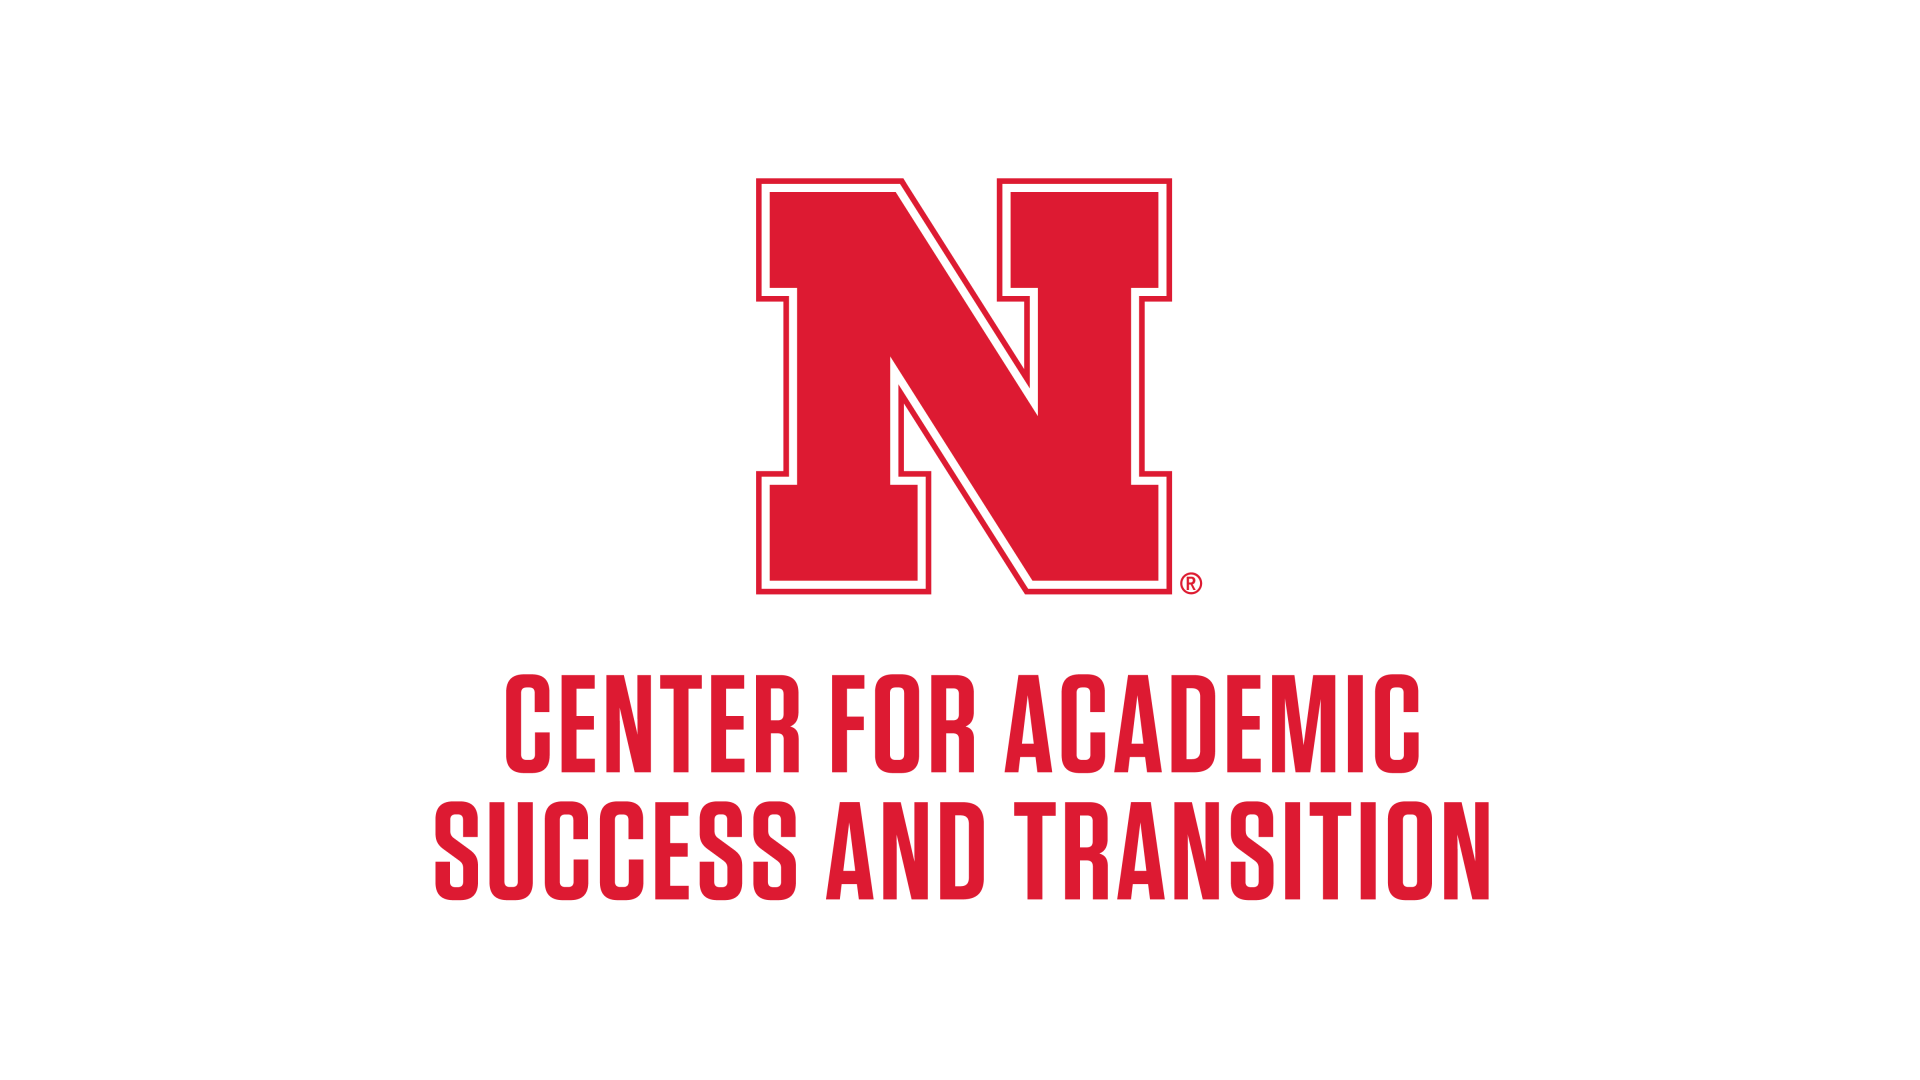 Center for Academic Success and Transition